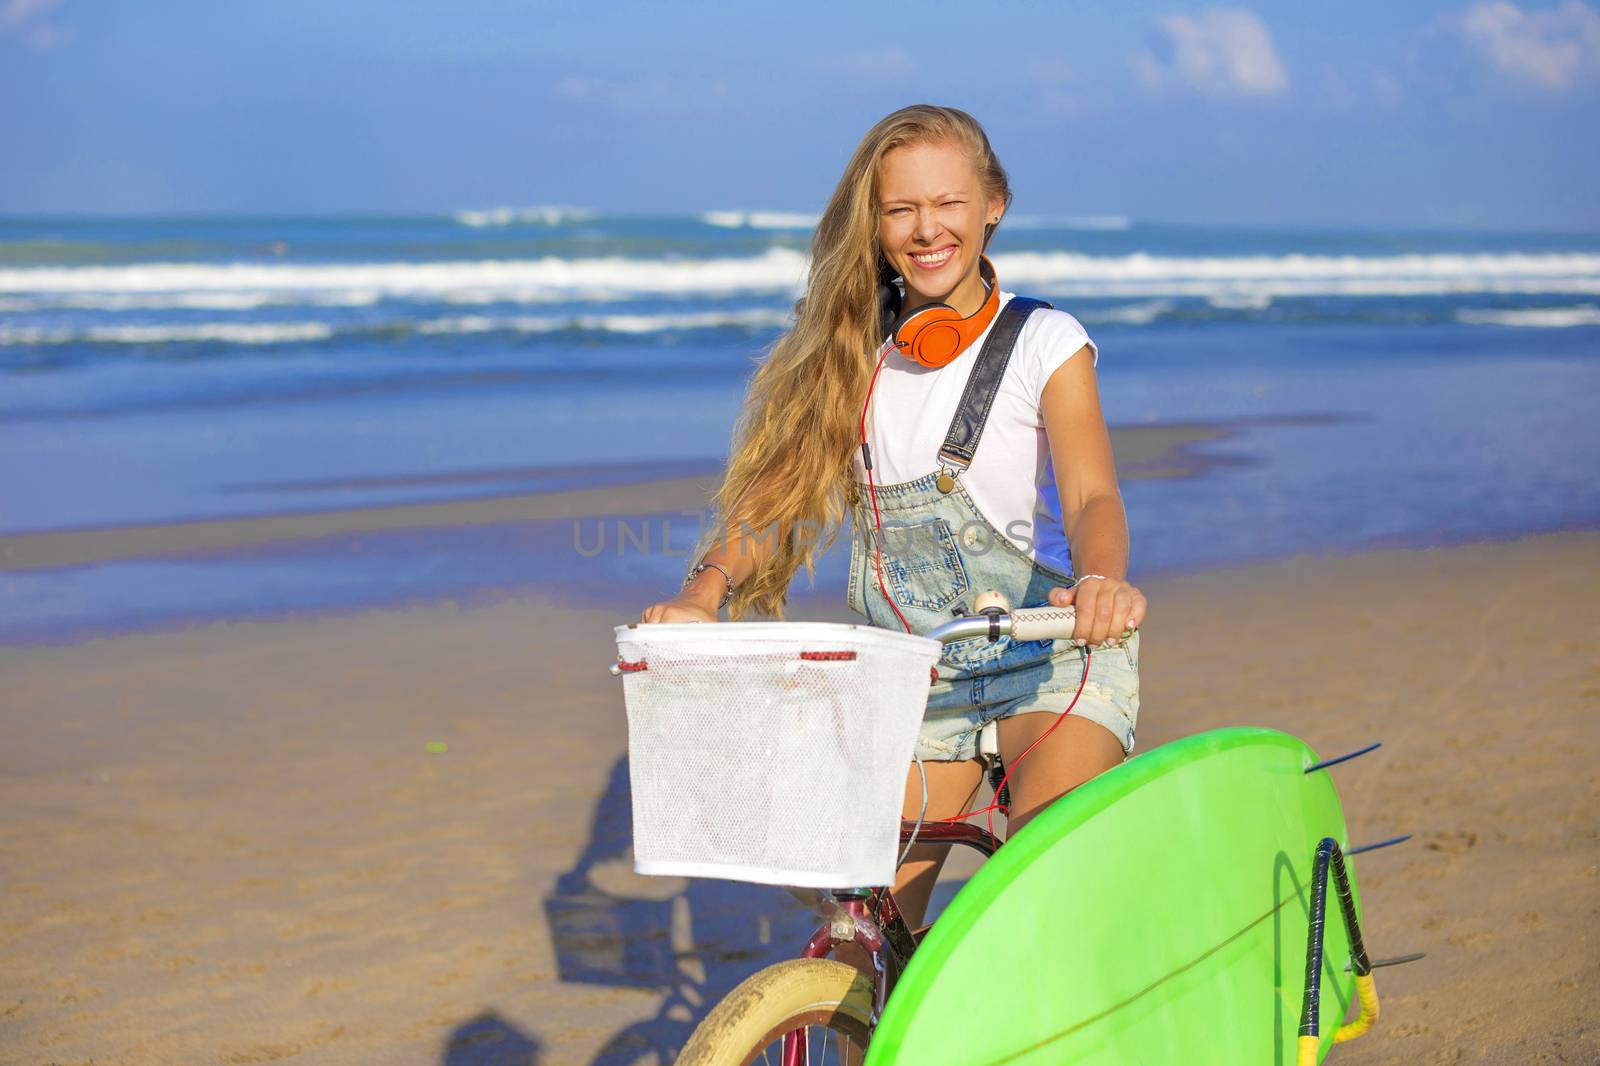 Young girl with surfboard and bicycle on the beach.